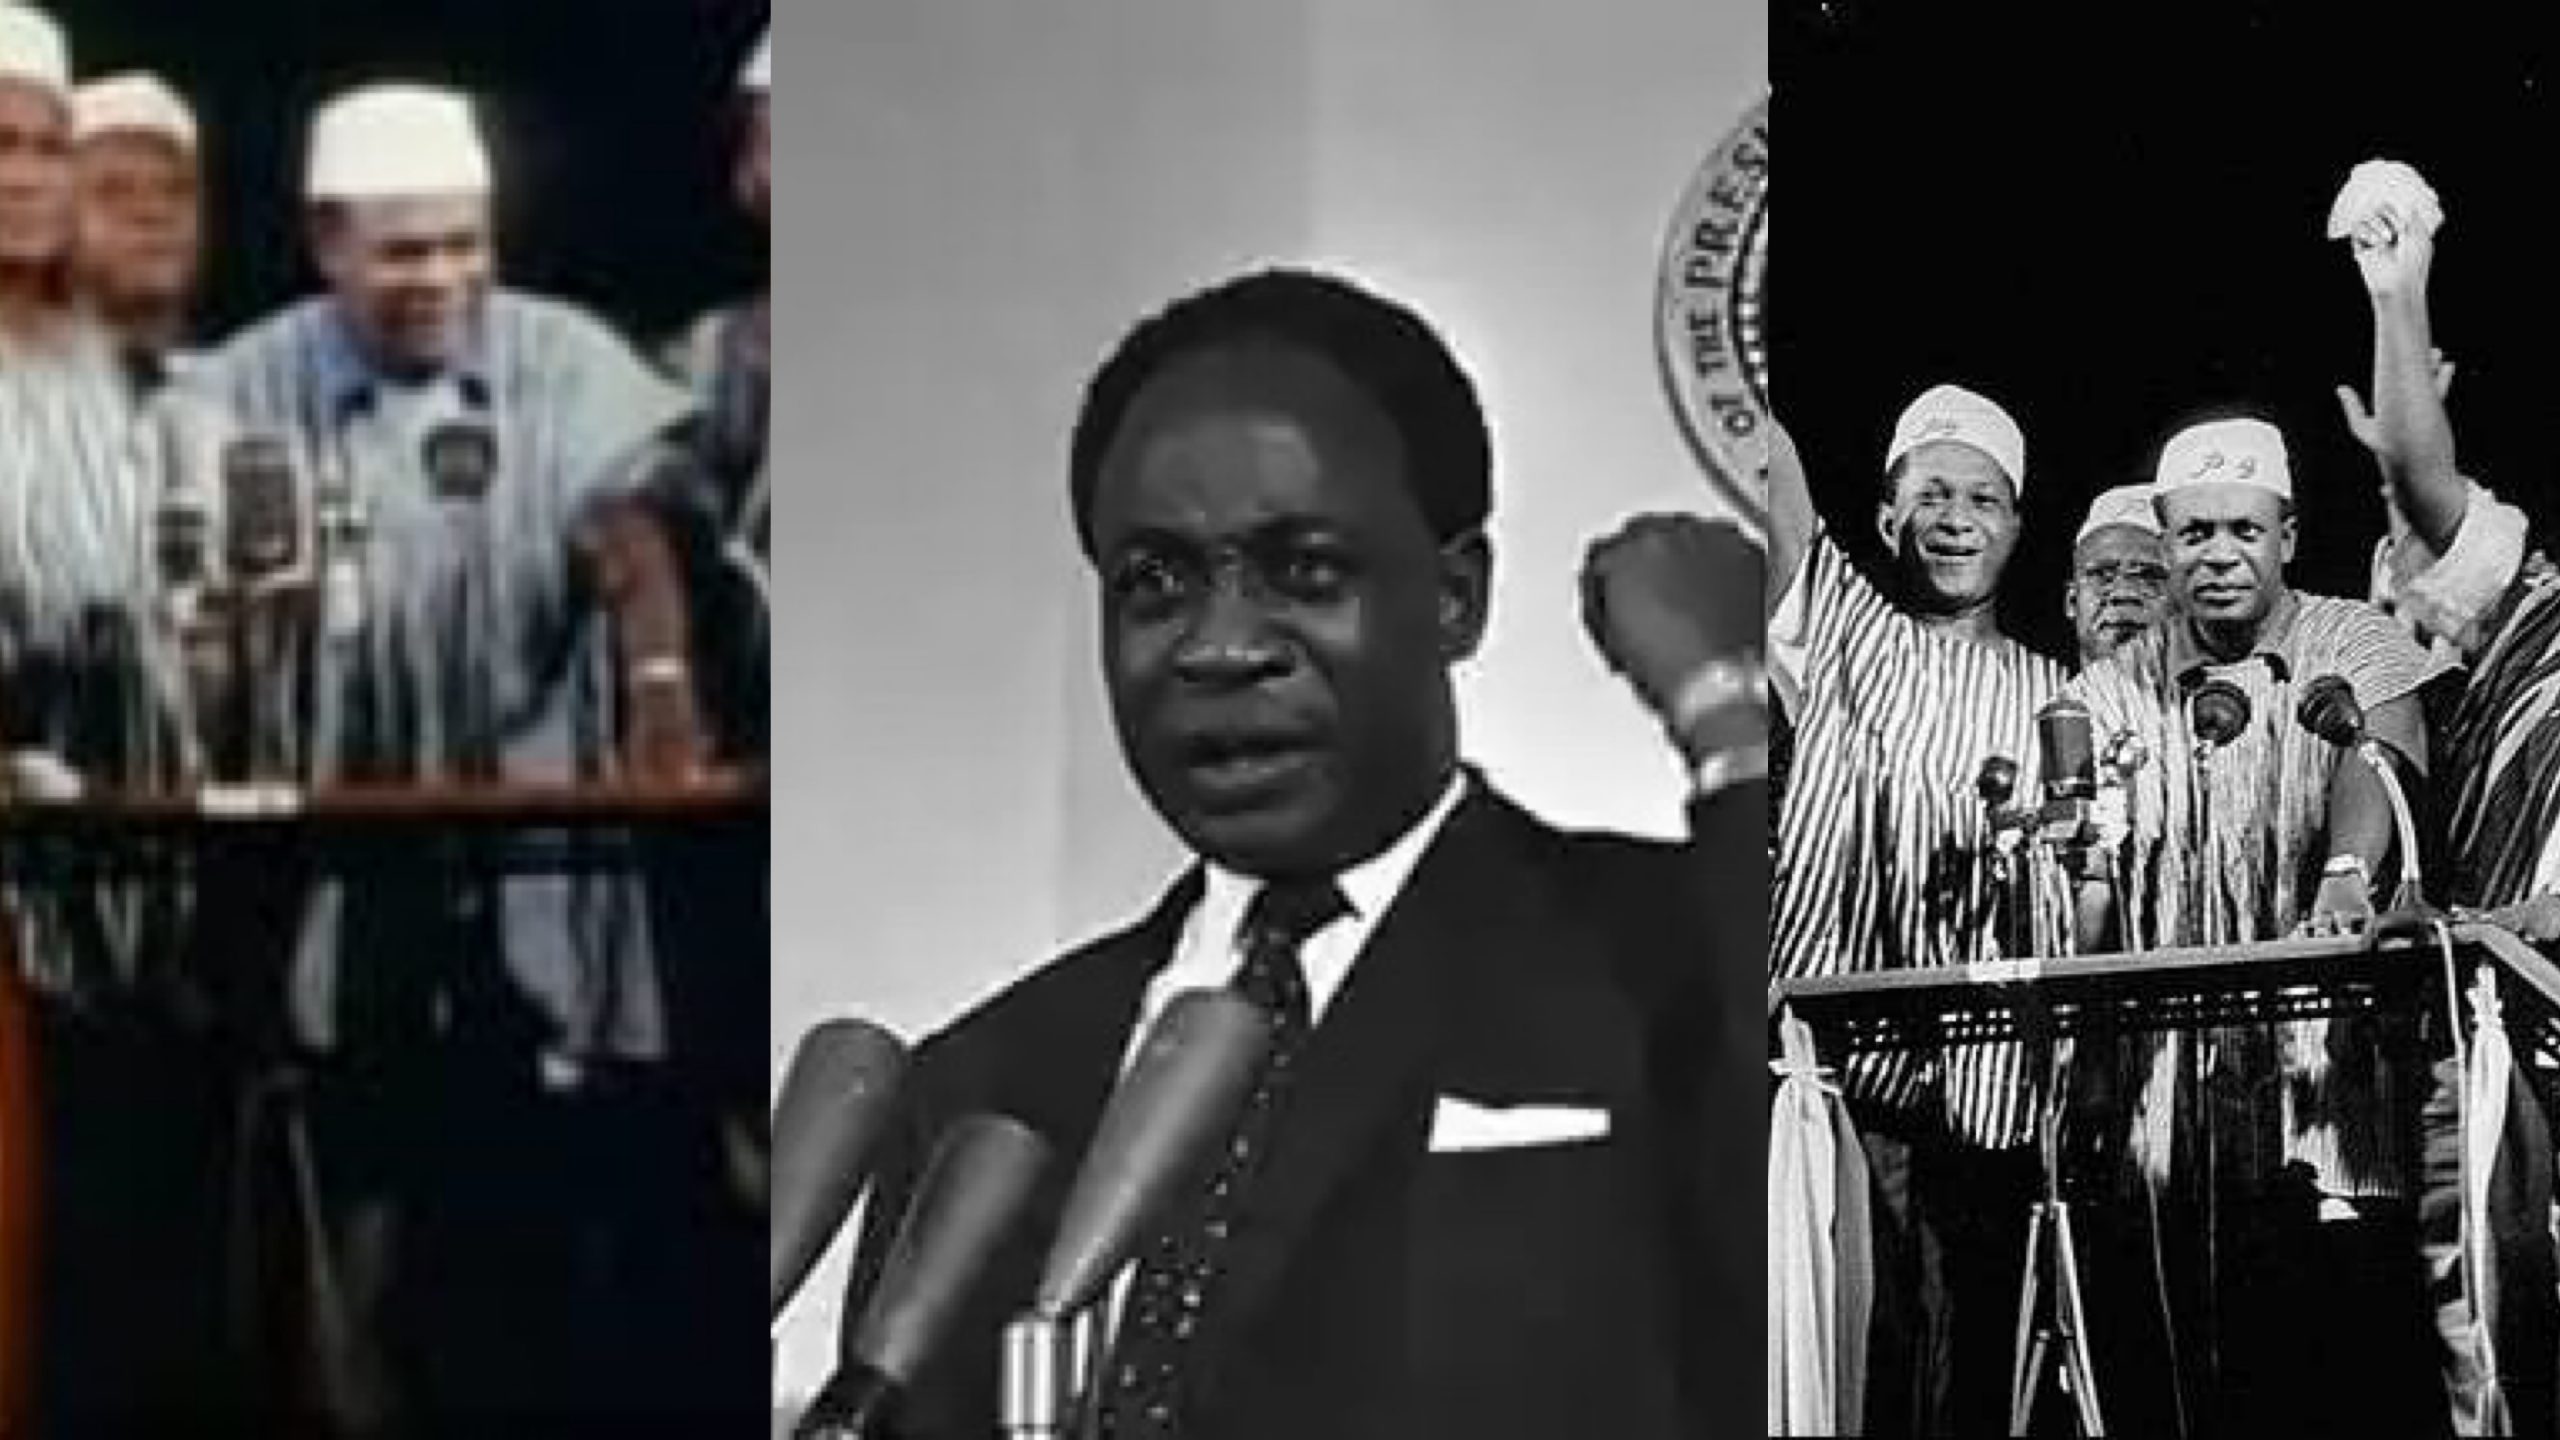 Today in history: Ghana becomes first African country to gain